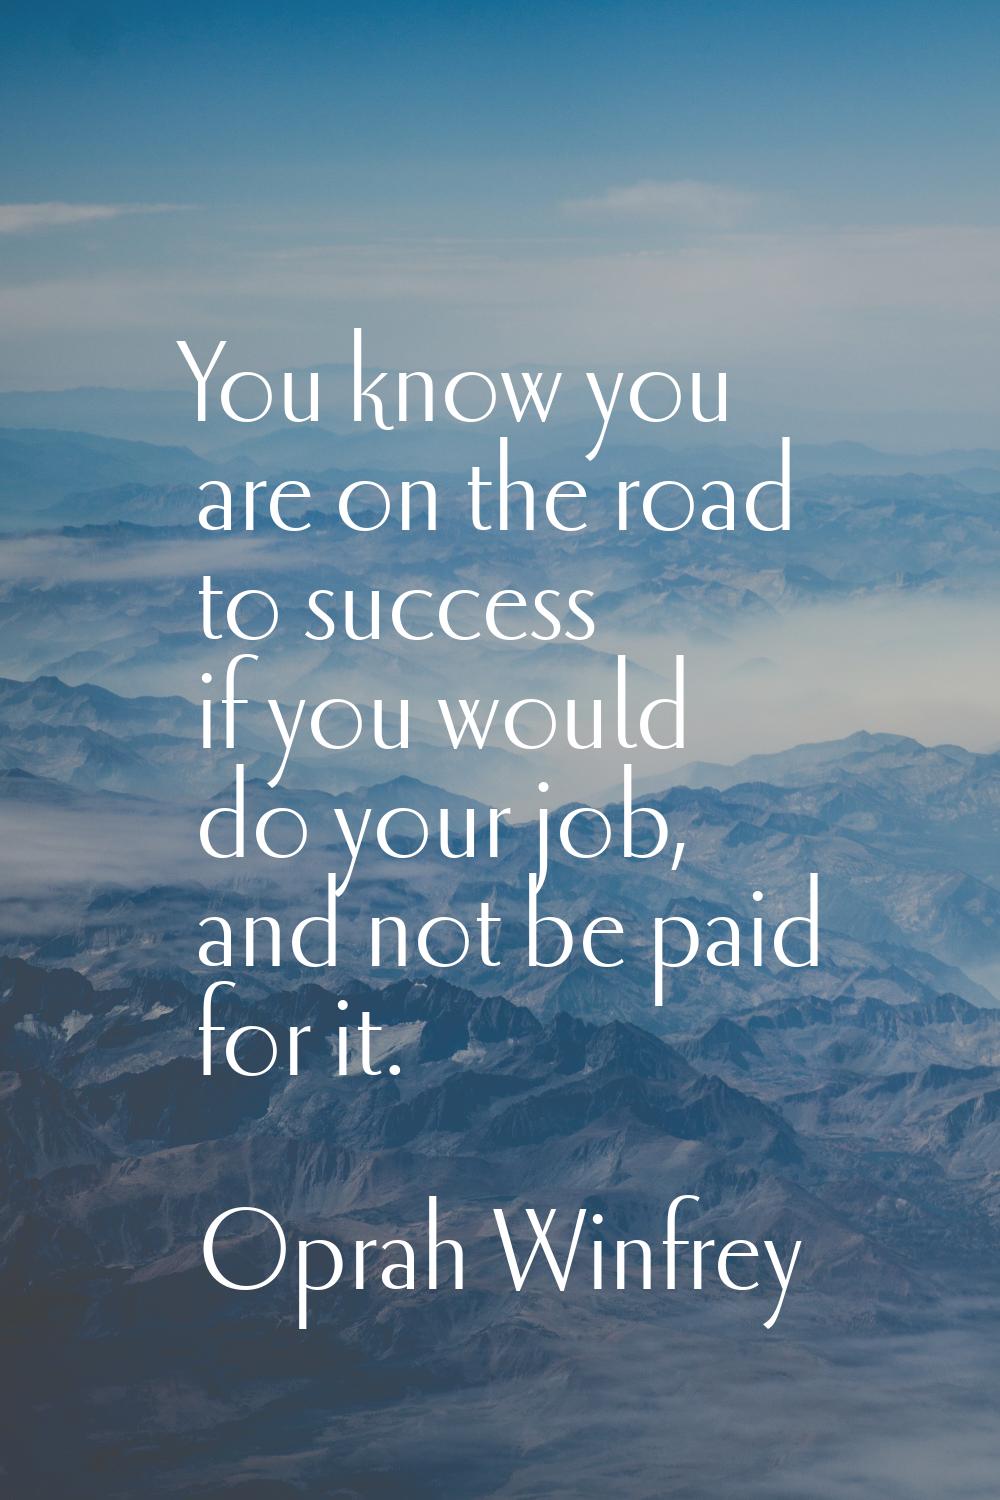 You know you are on the road to success if you would do your job, and not be paid for it.